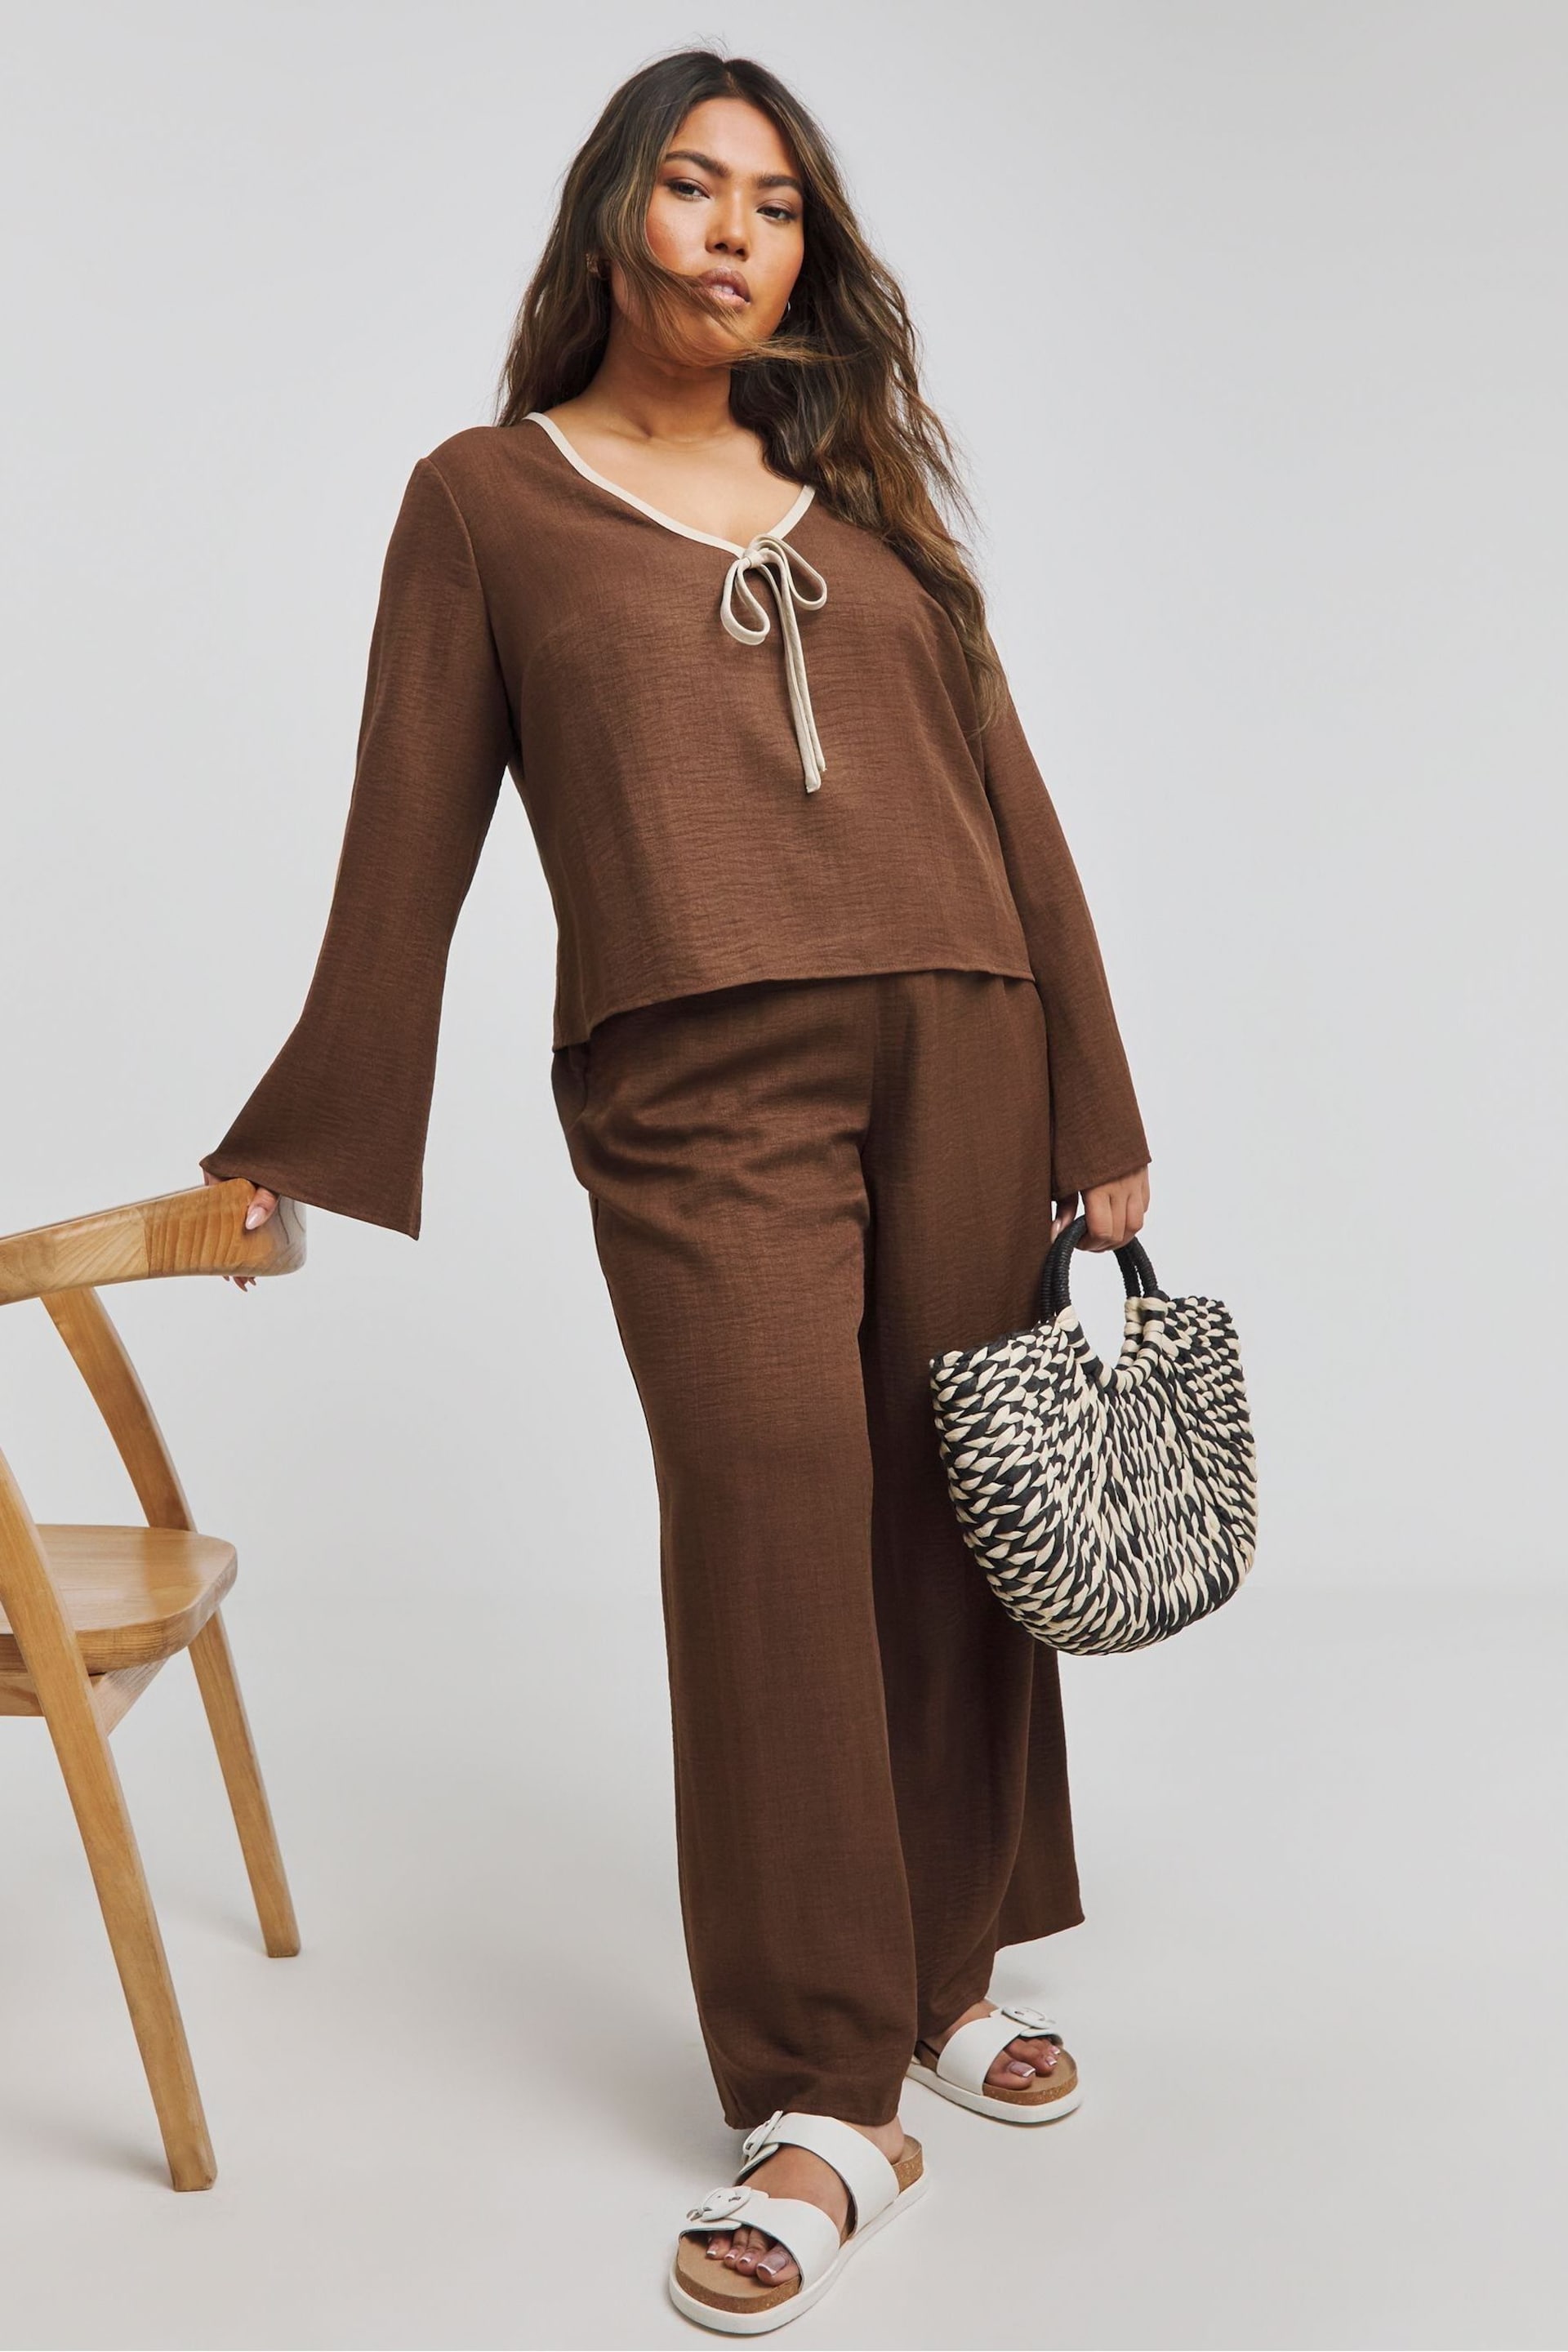 Simply Be Brown Contrast Trim Tie Front Blouse - Image 3 of 4